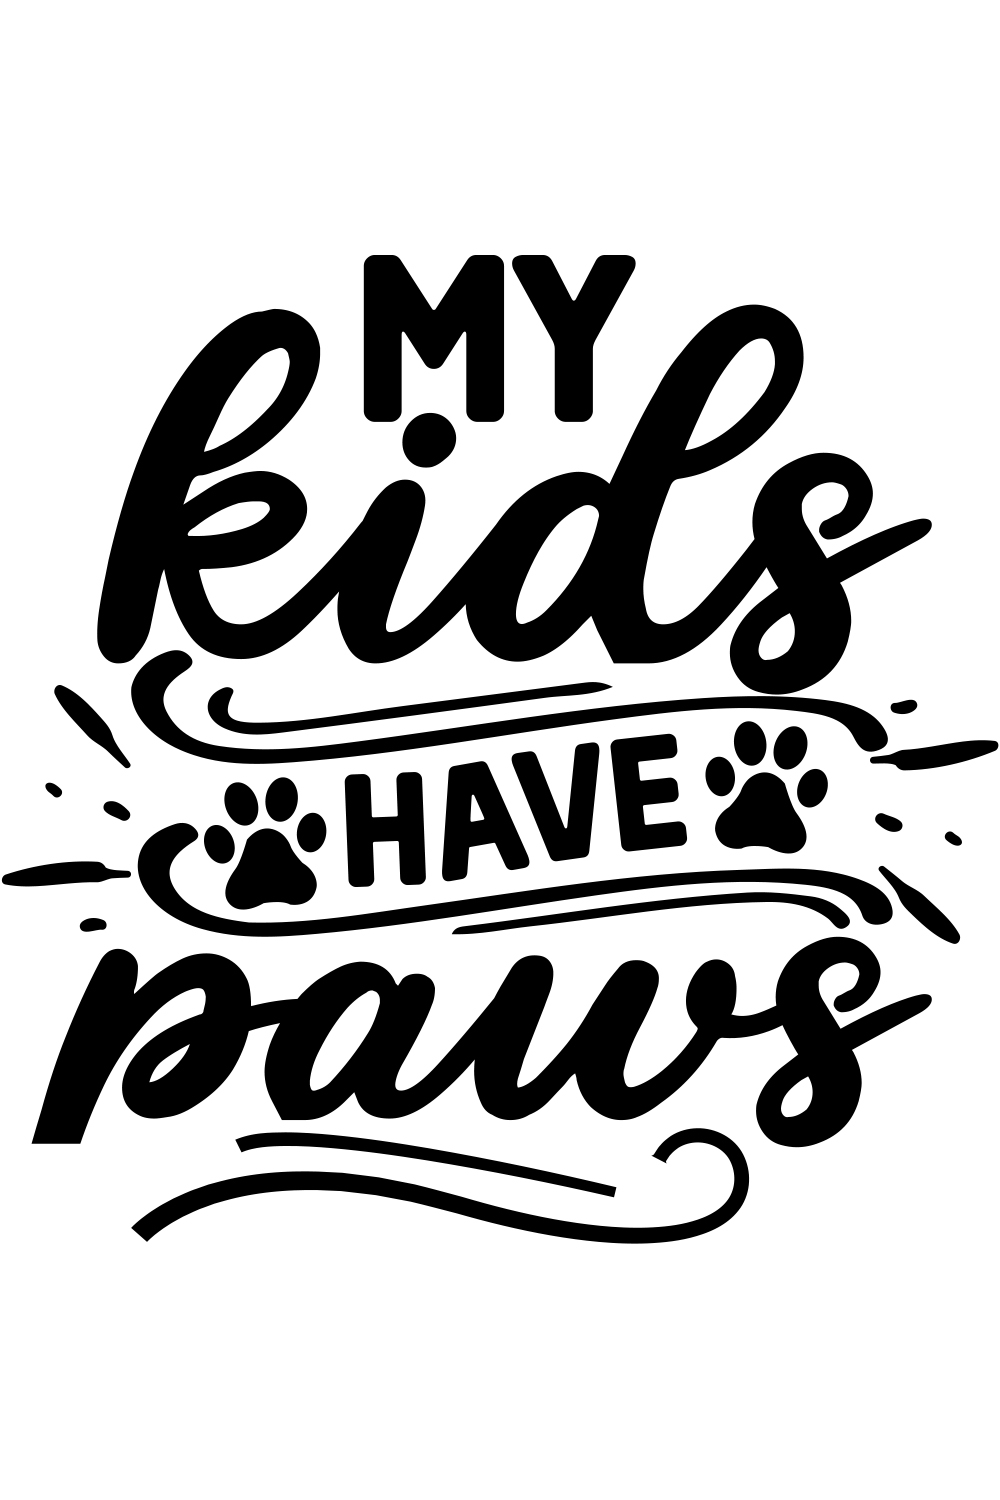 My kids have paws svg pinterest preview image.